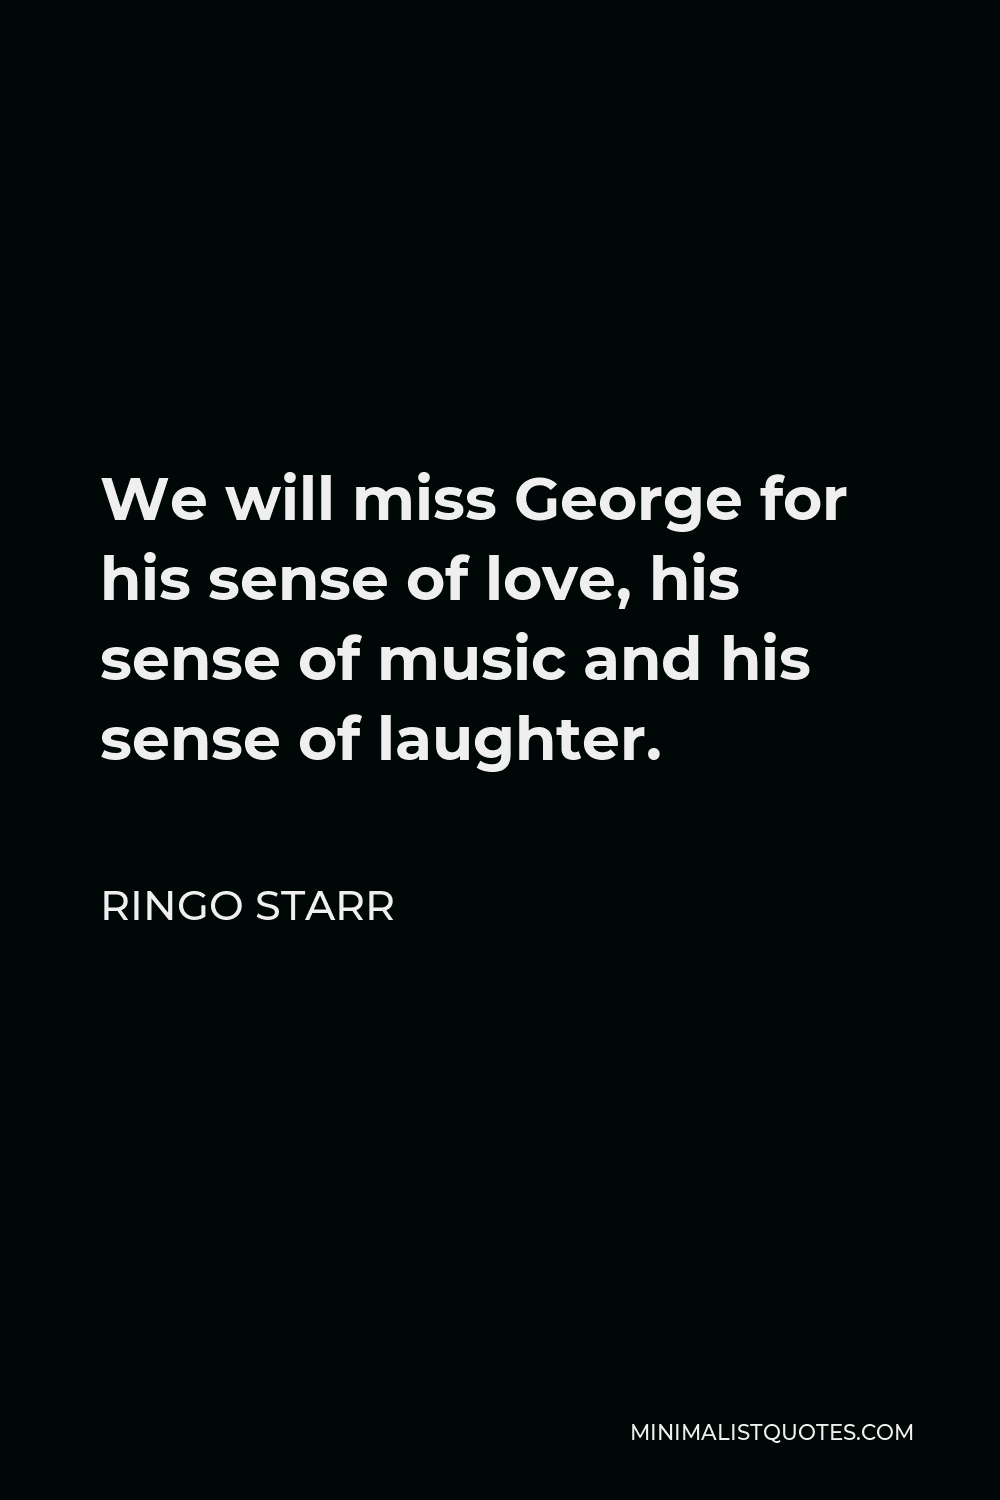 Ringo Starr Quote - We will miss George for his sense of love, his sense of music and his sense of laughter.